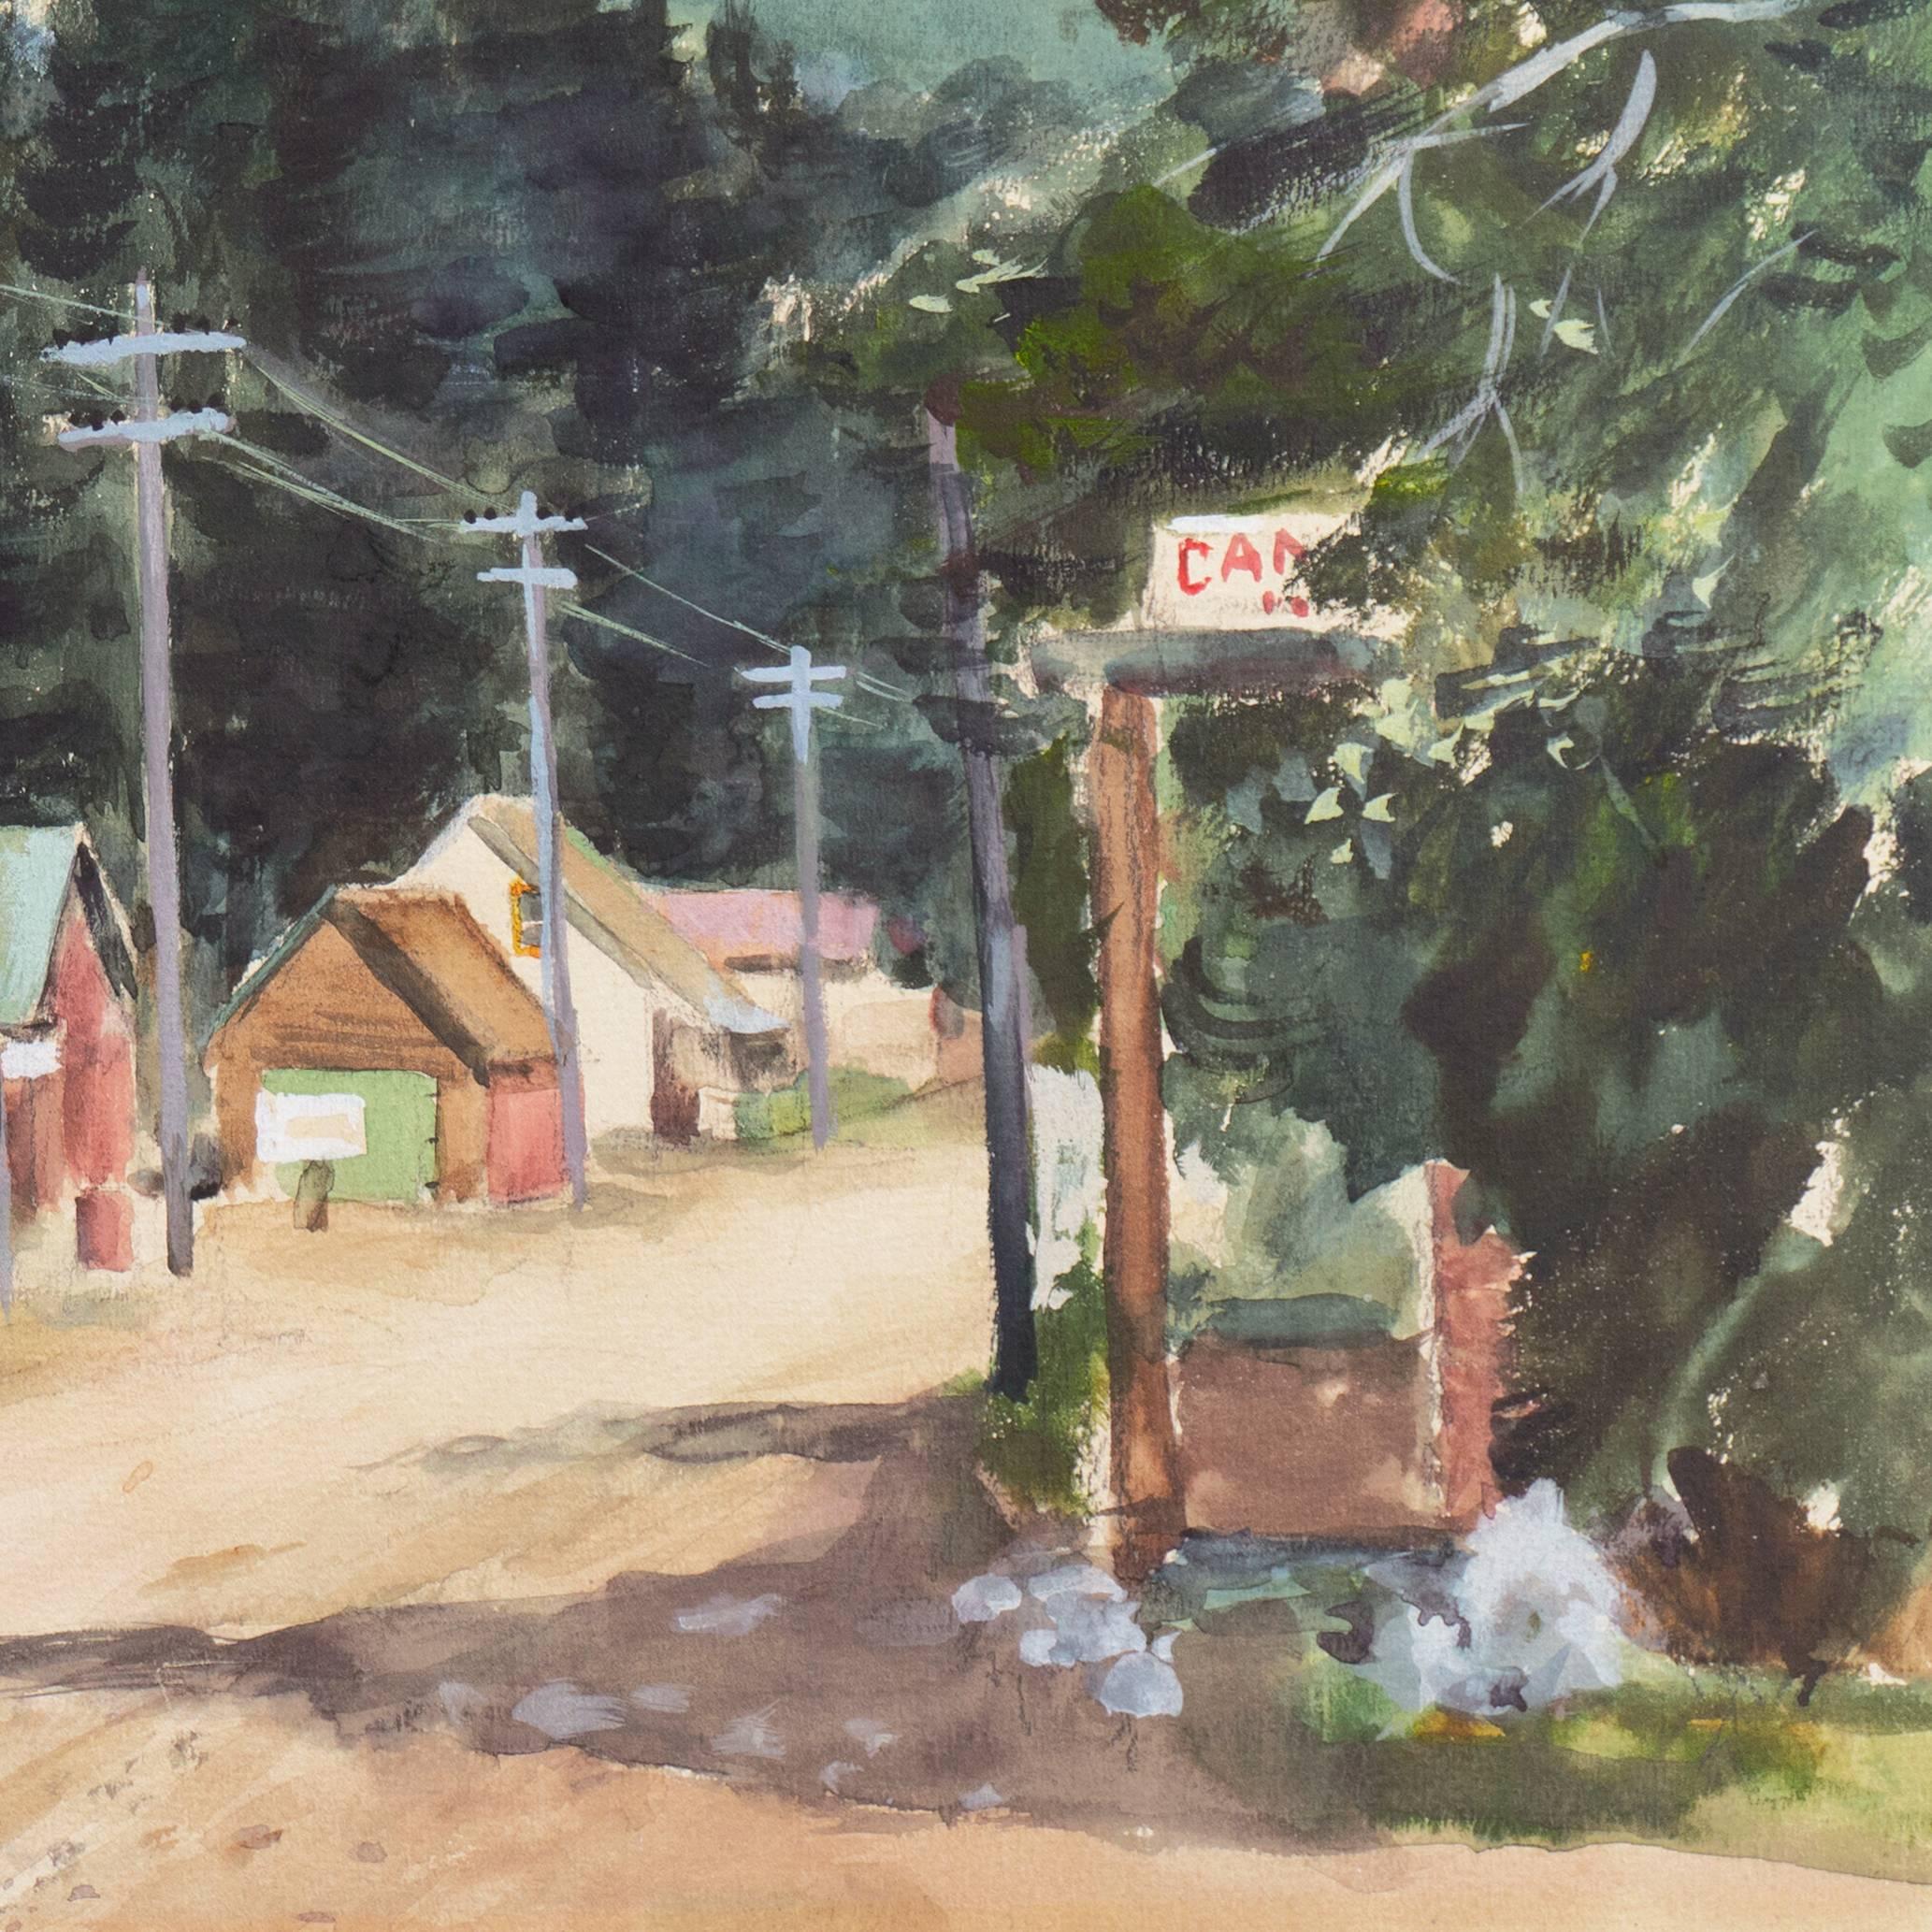 'Gold Country, California', San Francisco Bay Area, Hungarian, Foster City - Brown Landscape Art by Michel Kady